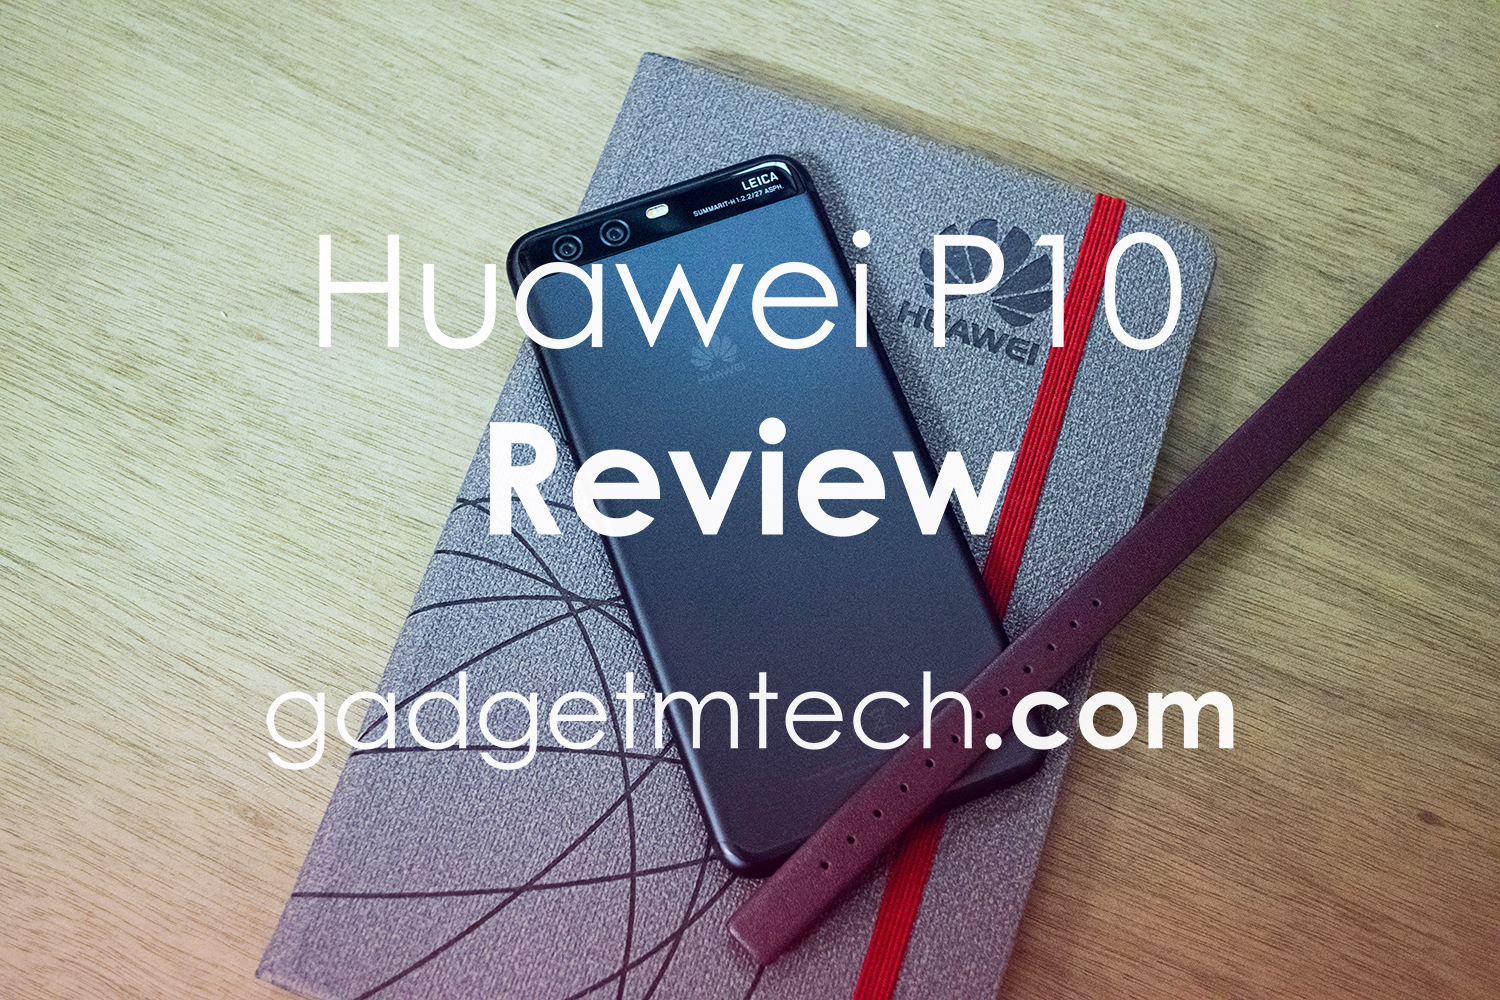 Huawei P10 Review: The Perfect 10?